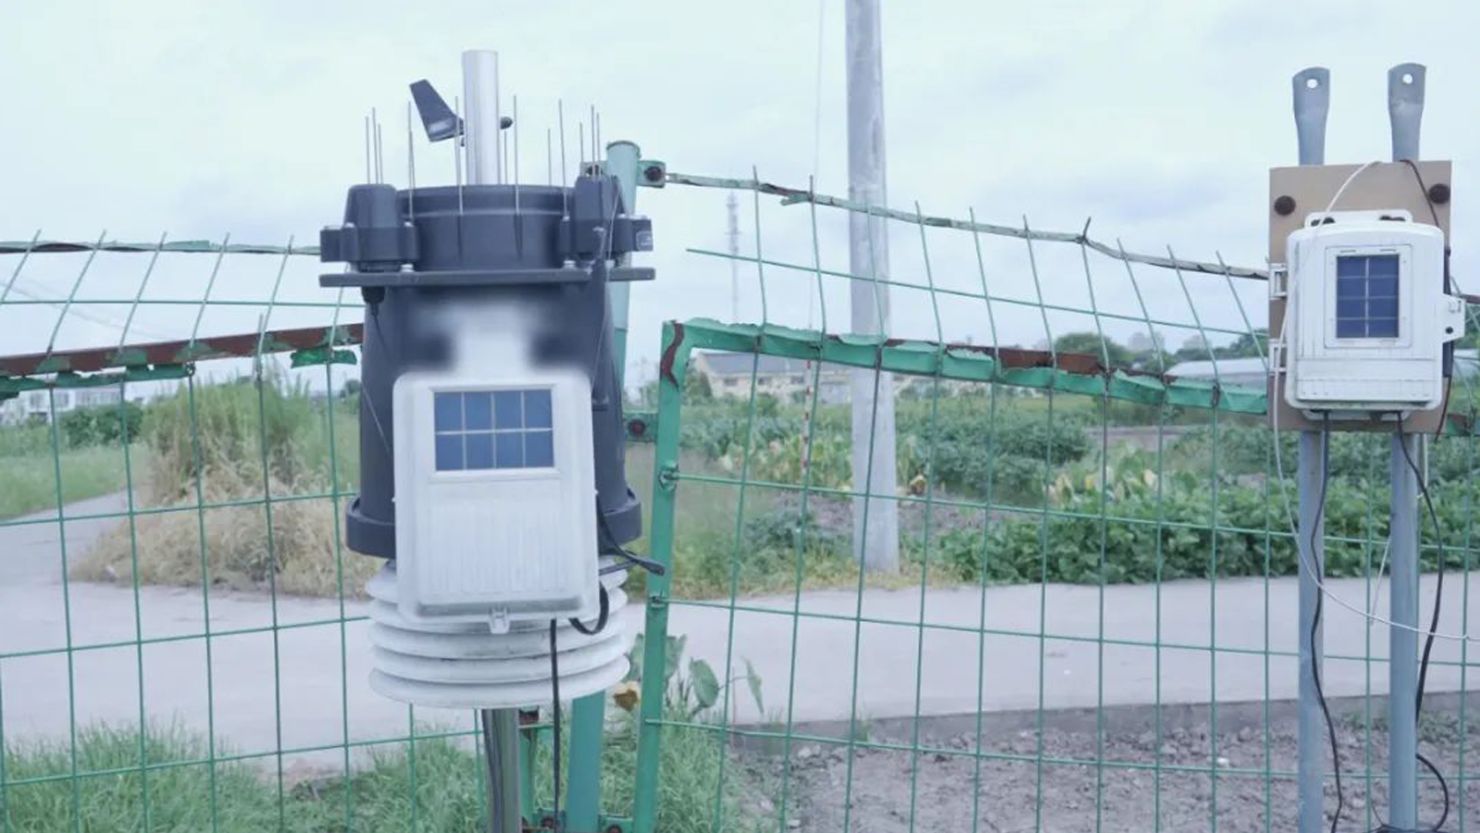 China is cracking down on weather stations it says are spying for foreign  countries